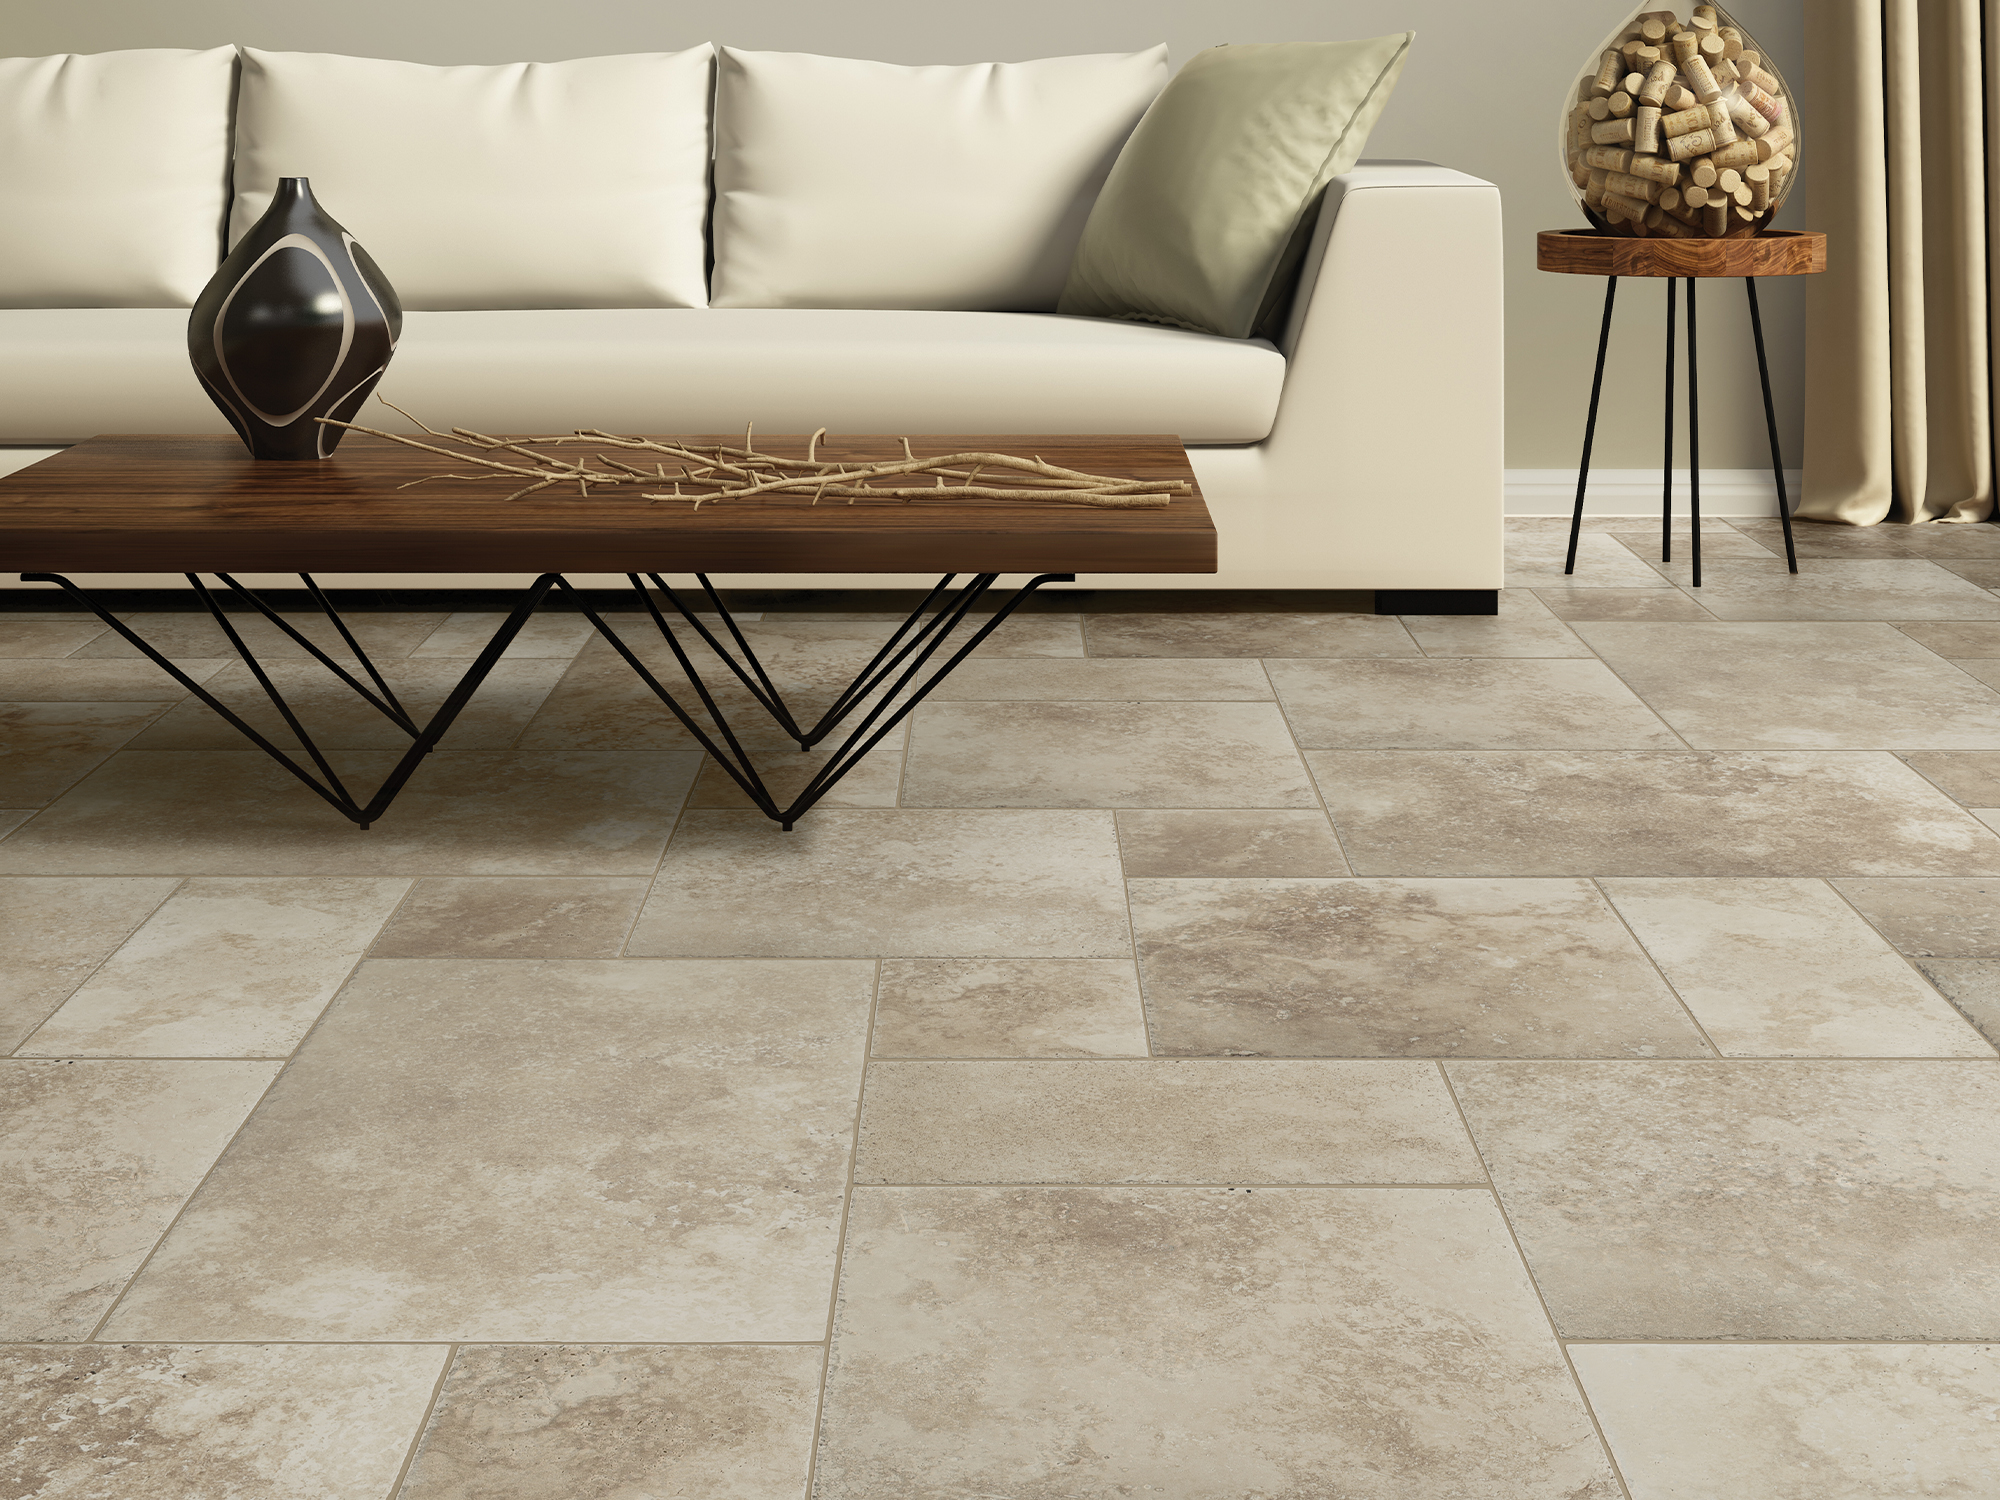 What Are the Benefits of Having Travertine Tiles In Your Home?